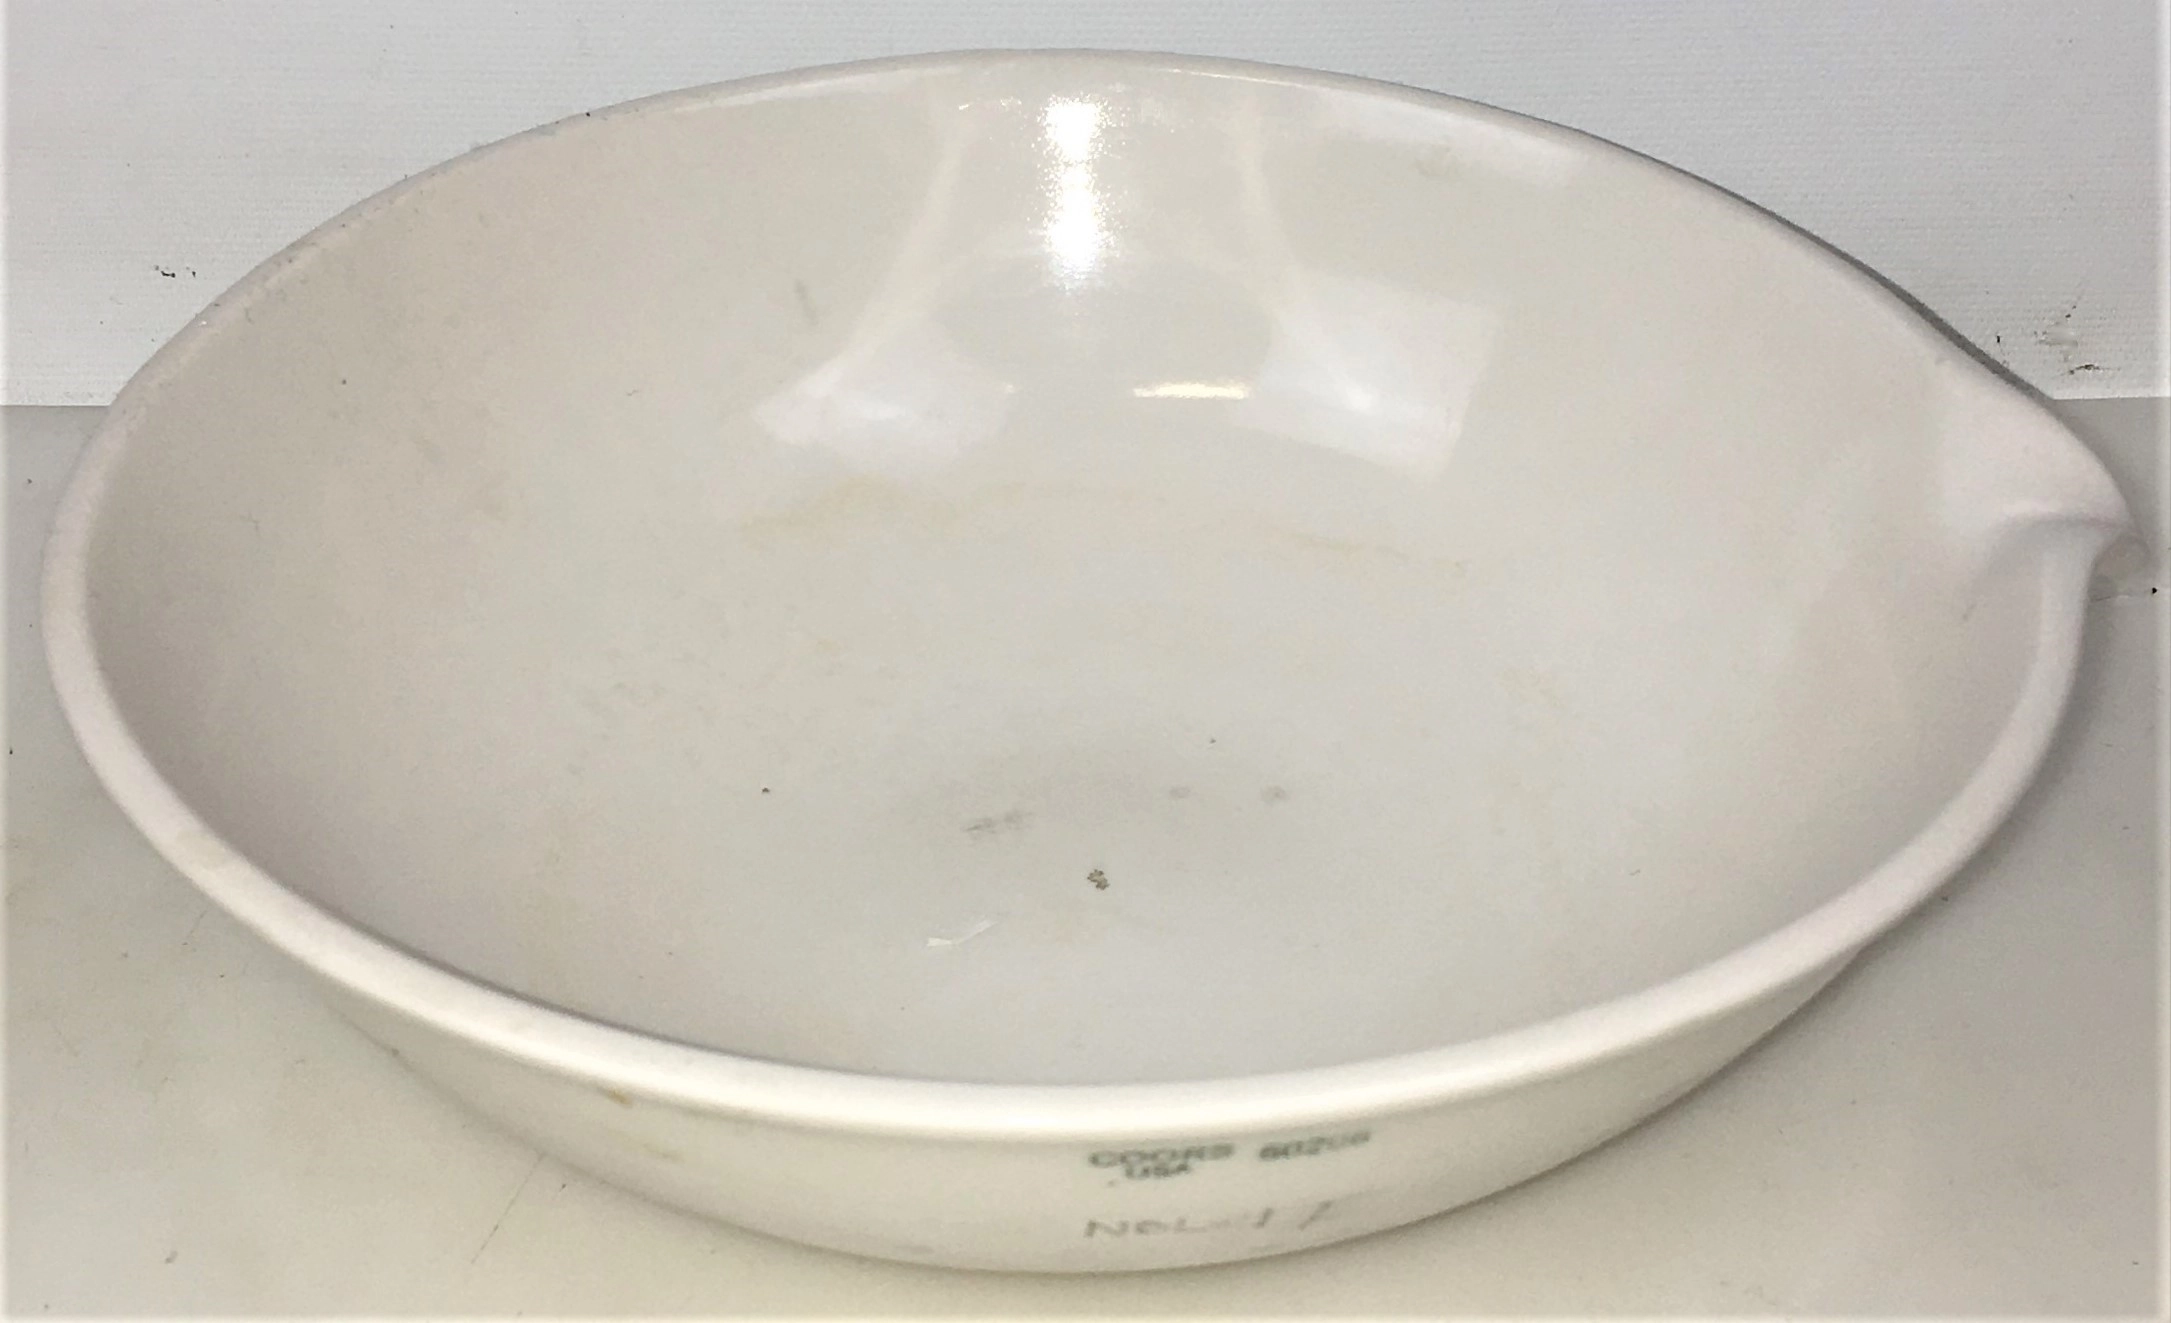 CooksTek 60206 (66206) Evaporating Dish with Pouring Lip - 765mL